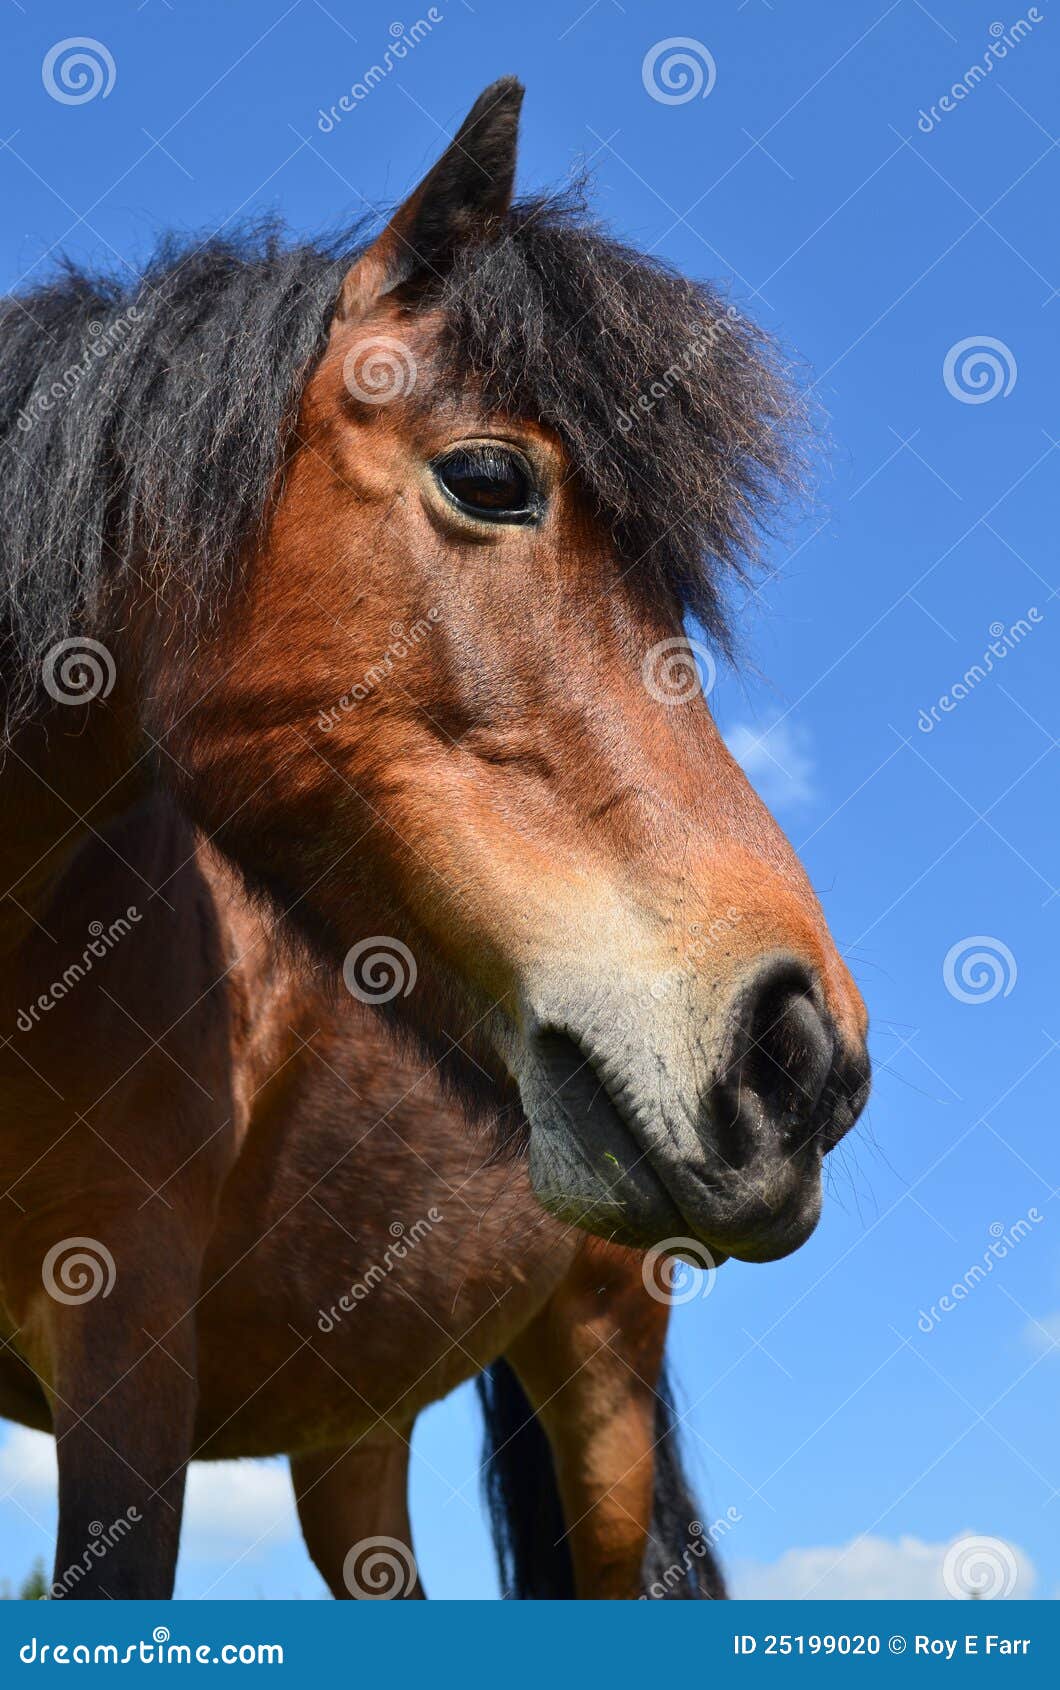 Brown Pony stock photo. Image of nose, head, standing - 25199020